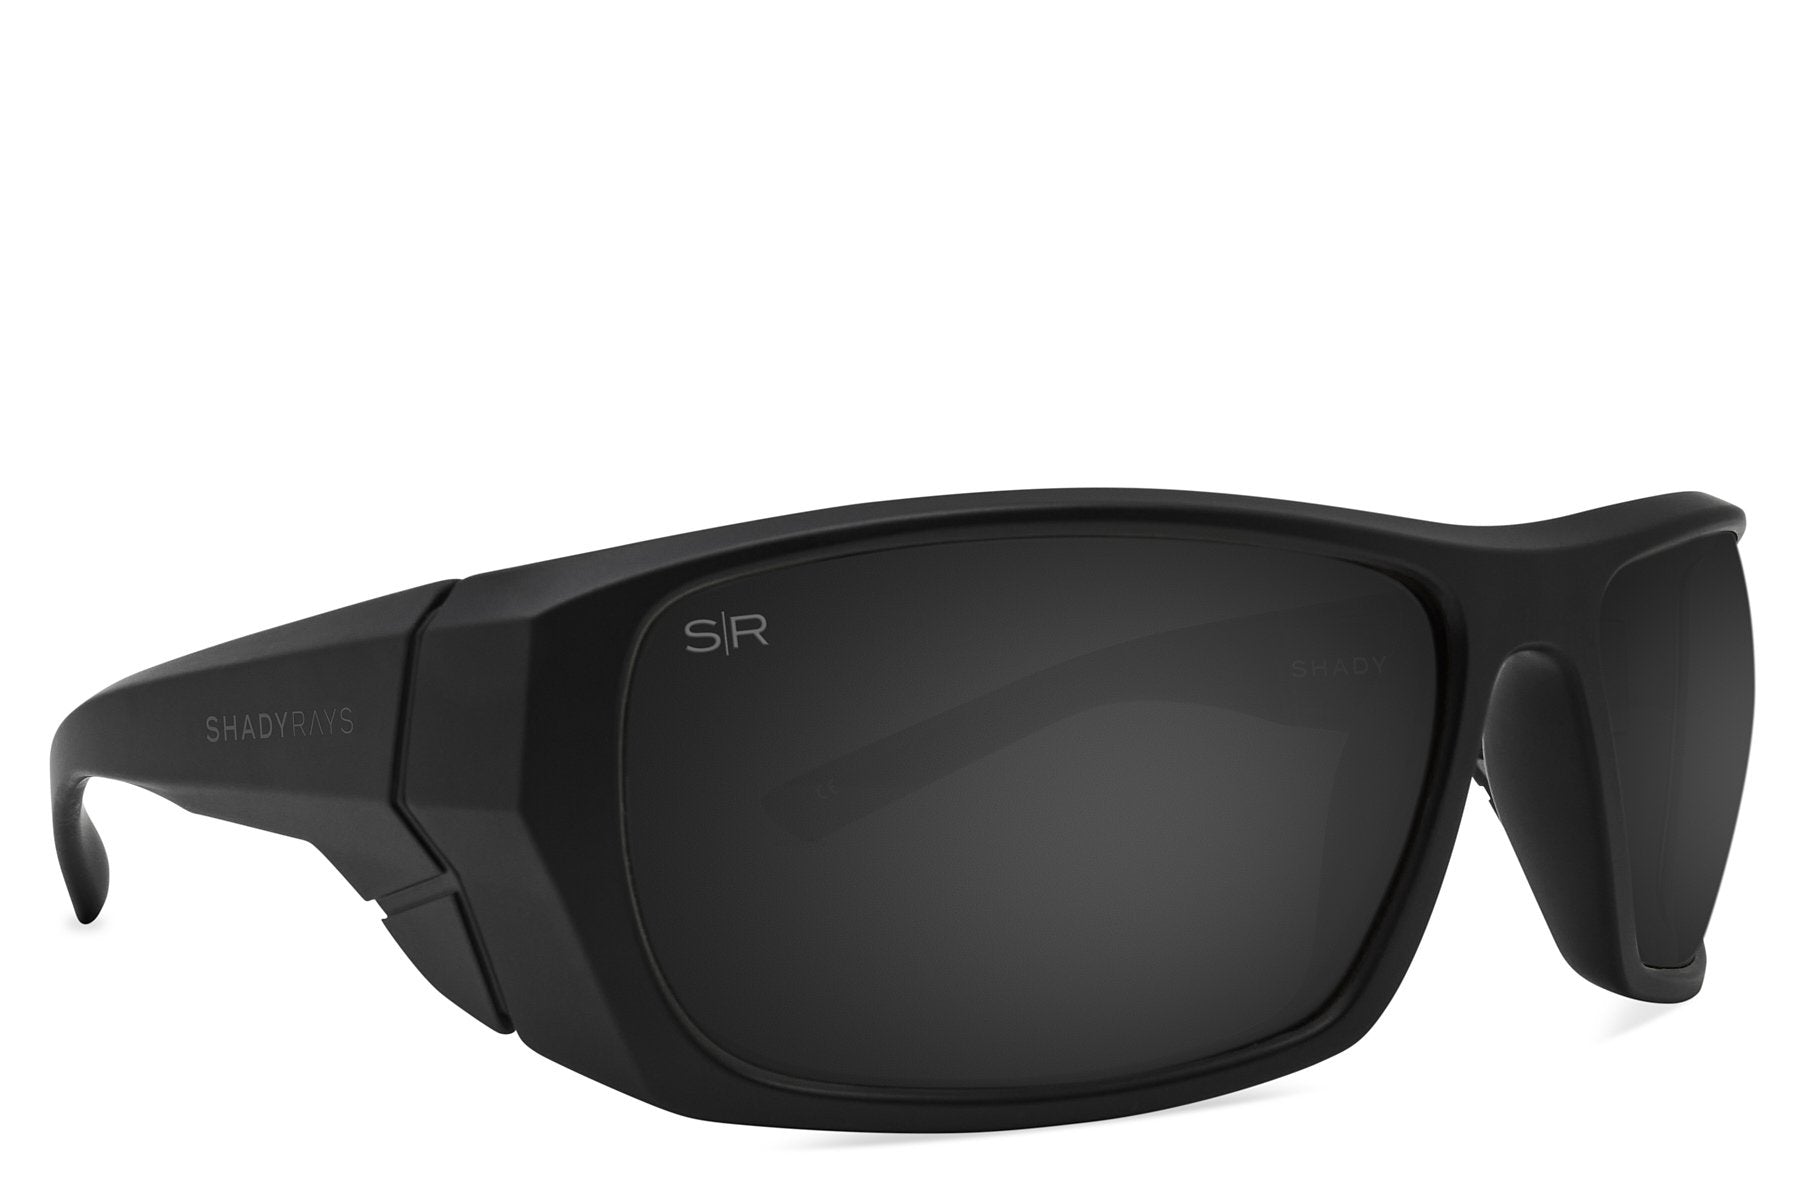 Terrain - Blackout Incognito Polarized Sunglasses | Matte Black Sunglasses | Best Christmas Gifts | Gifts for The Holidays | Unique Gifts for Friends